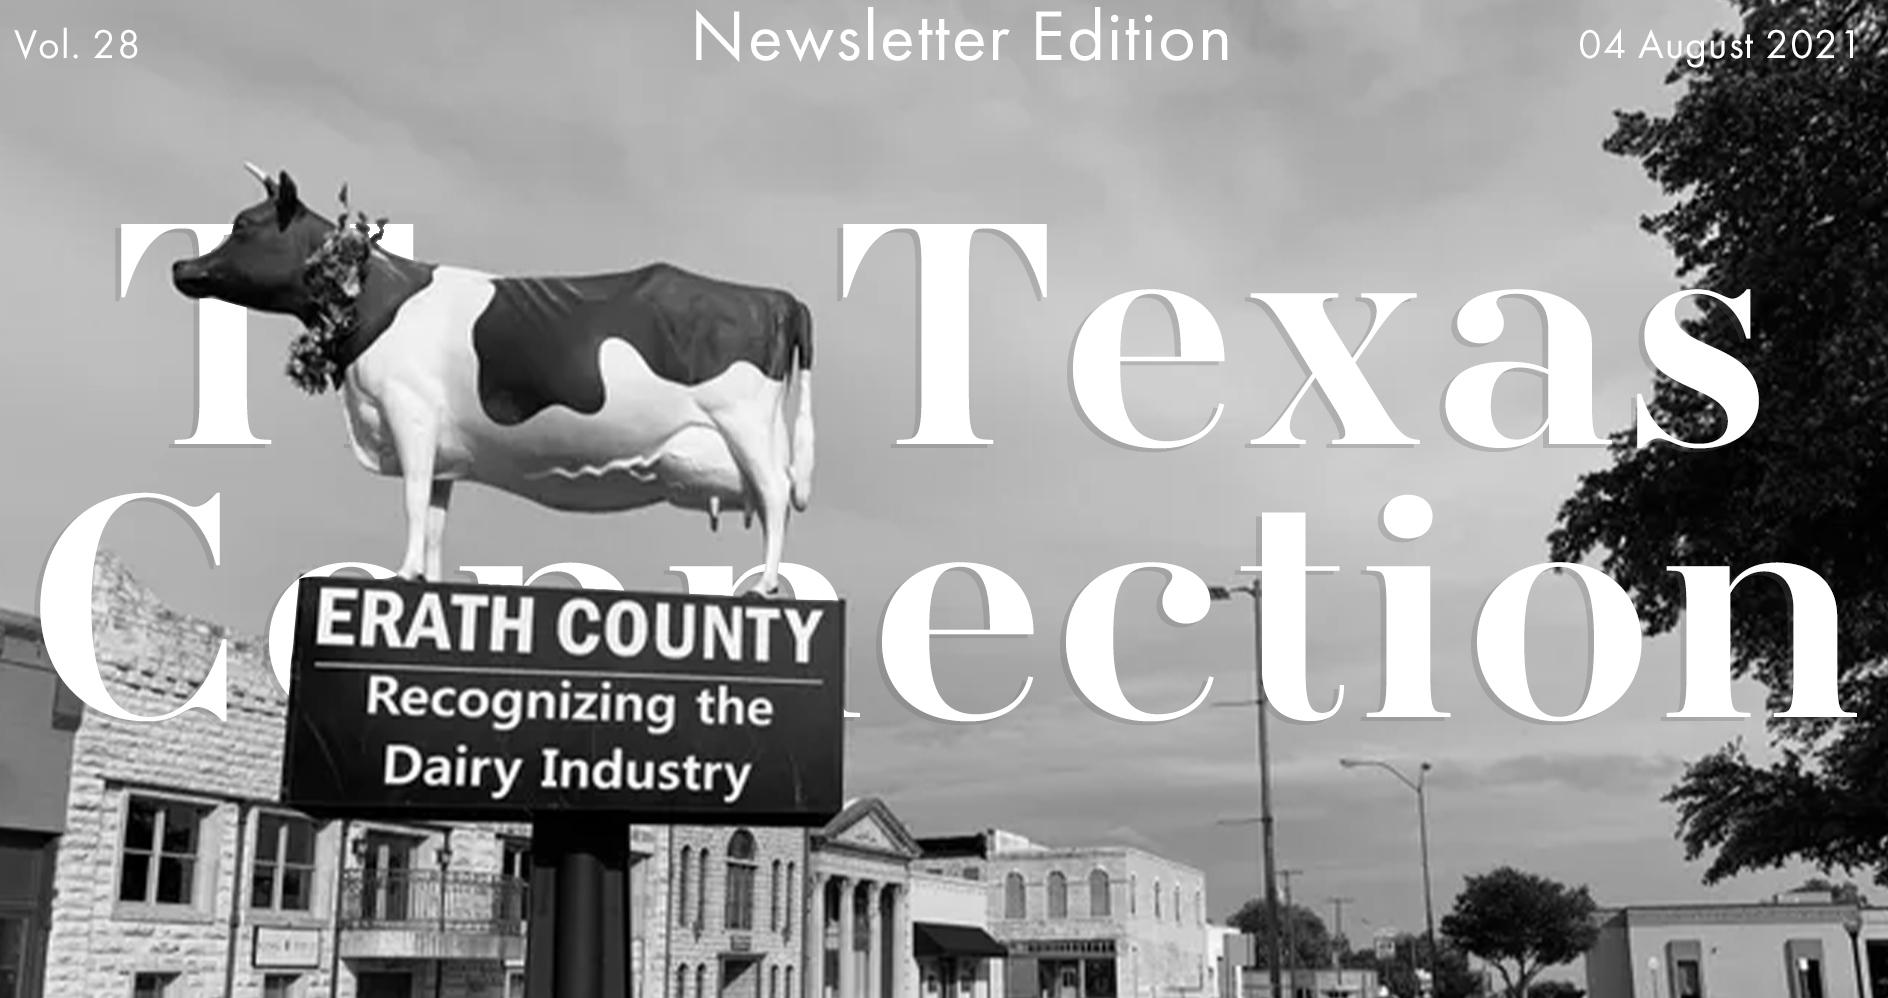 The Texas Connection Vol. 28